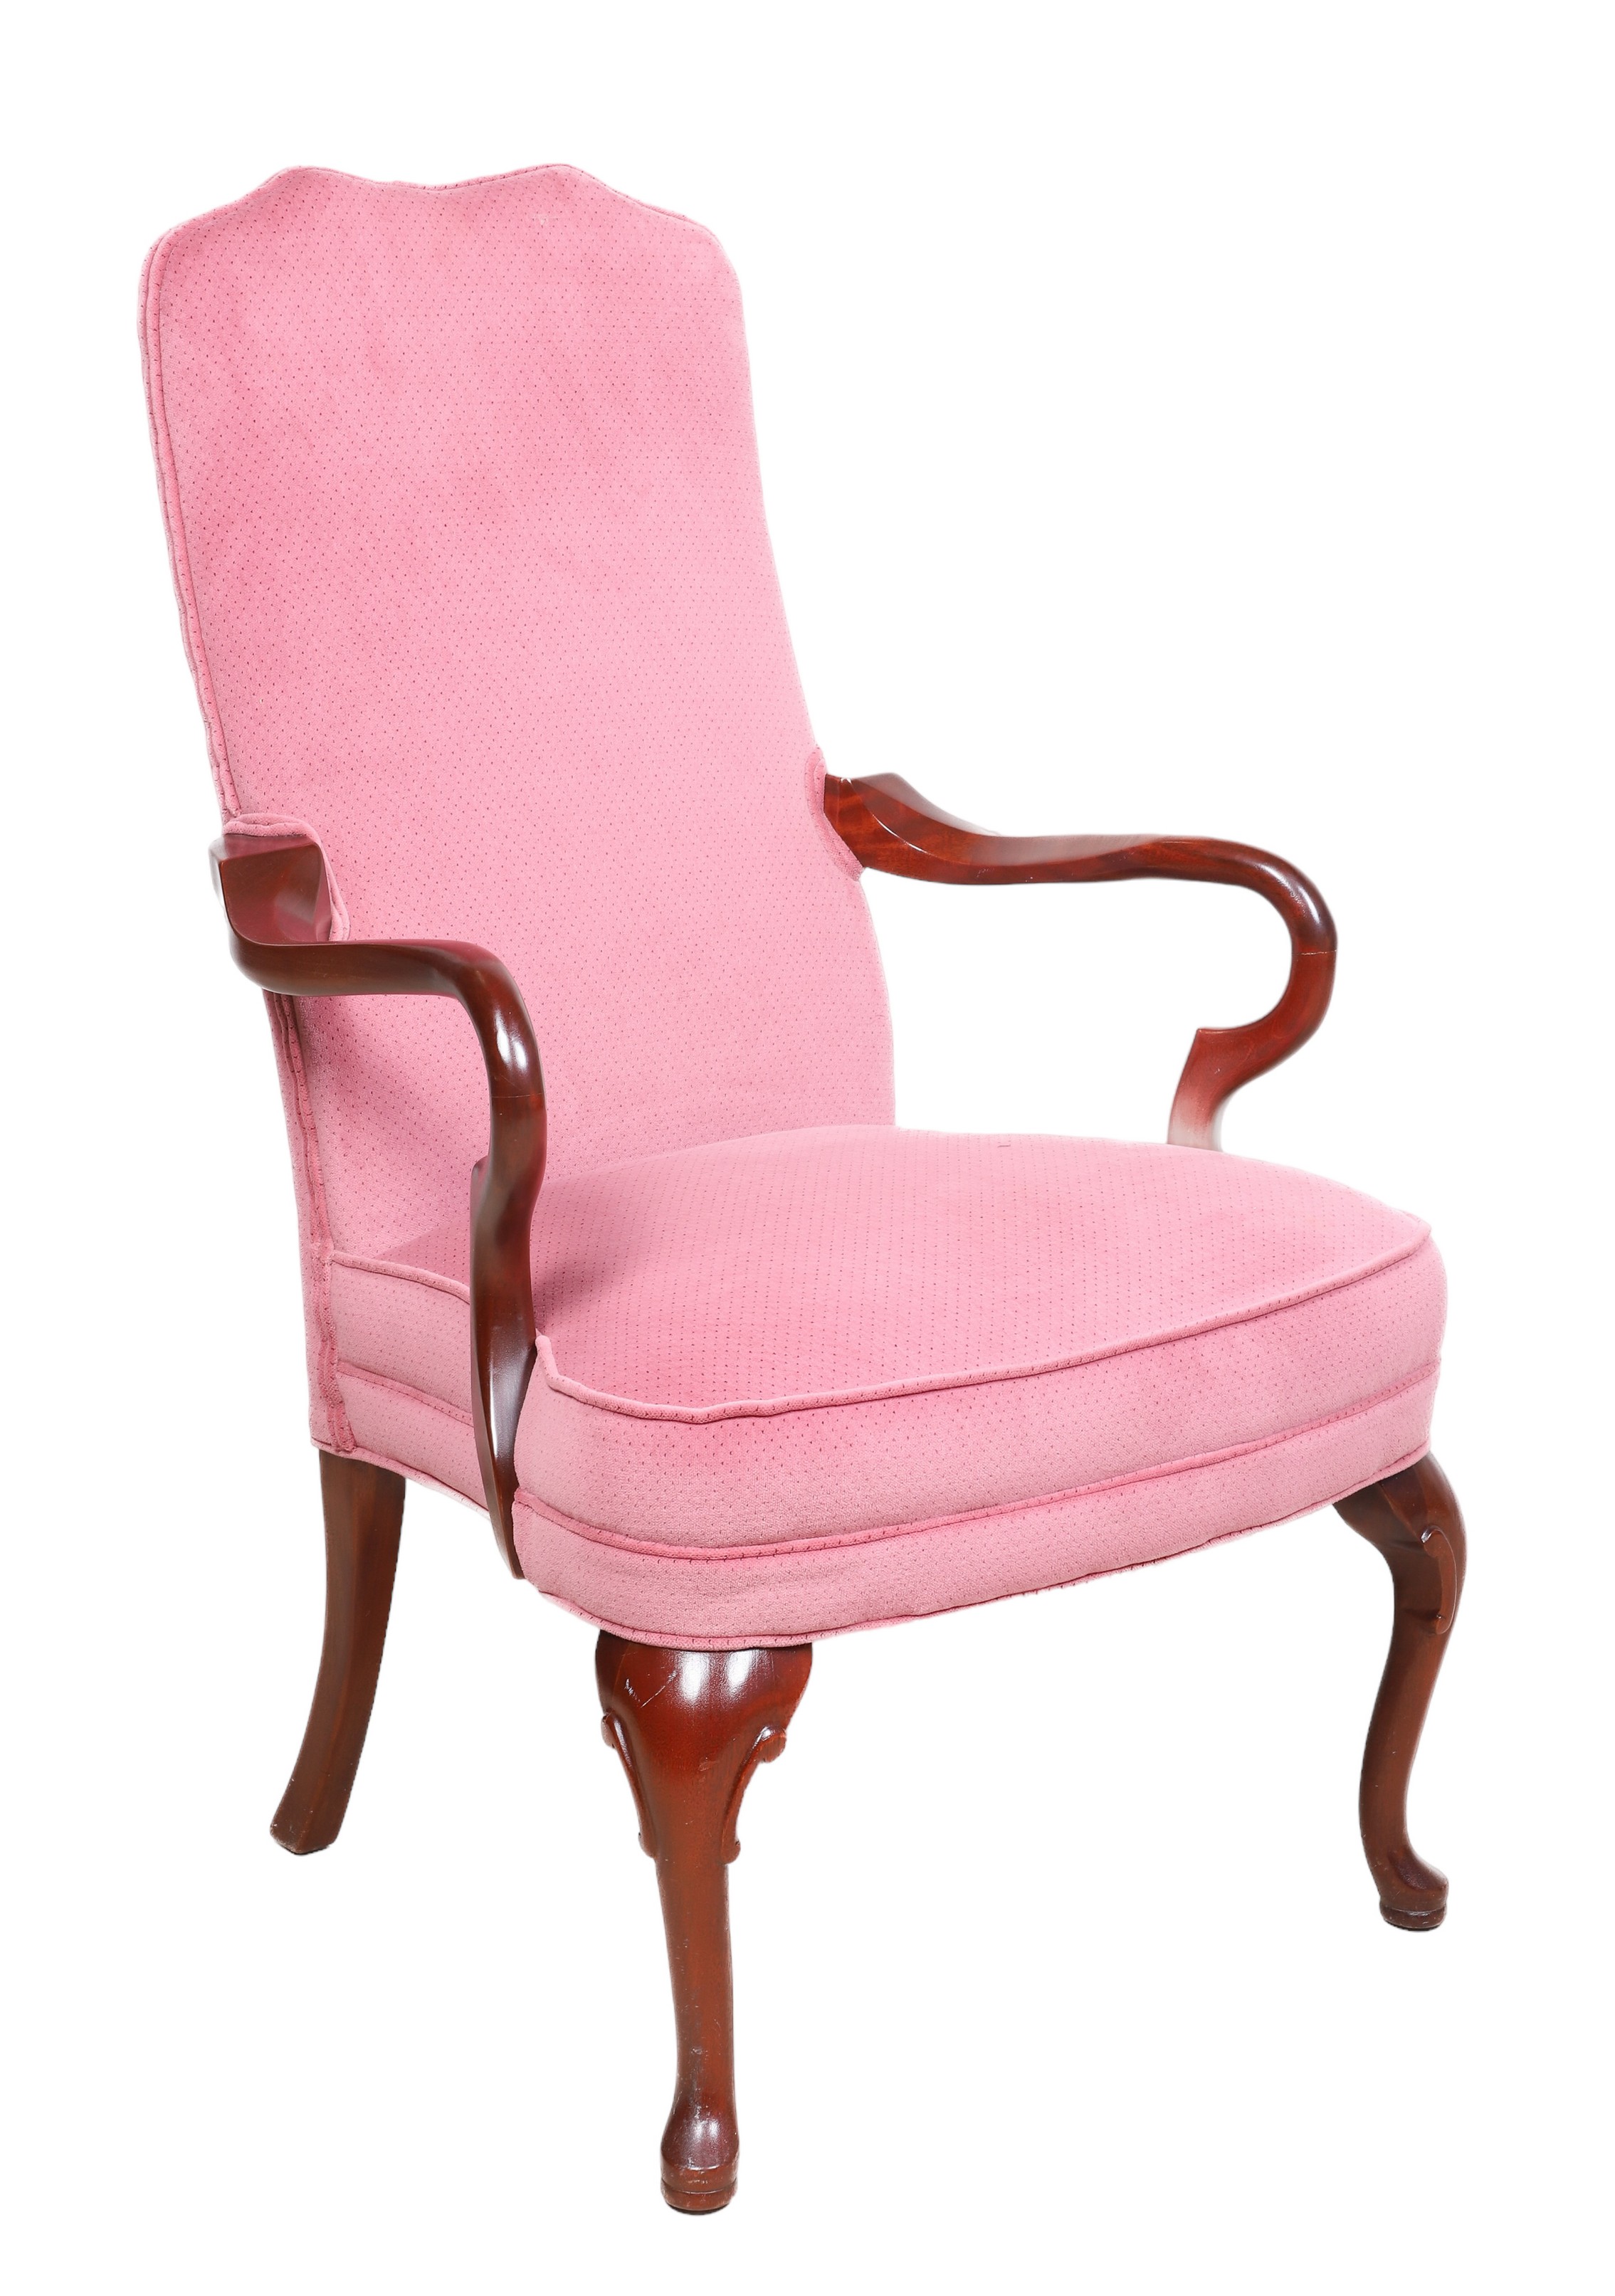 Queen Anne style upholstered open 2e1239